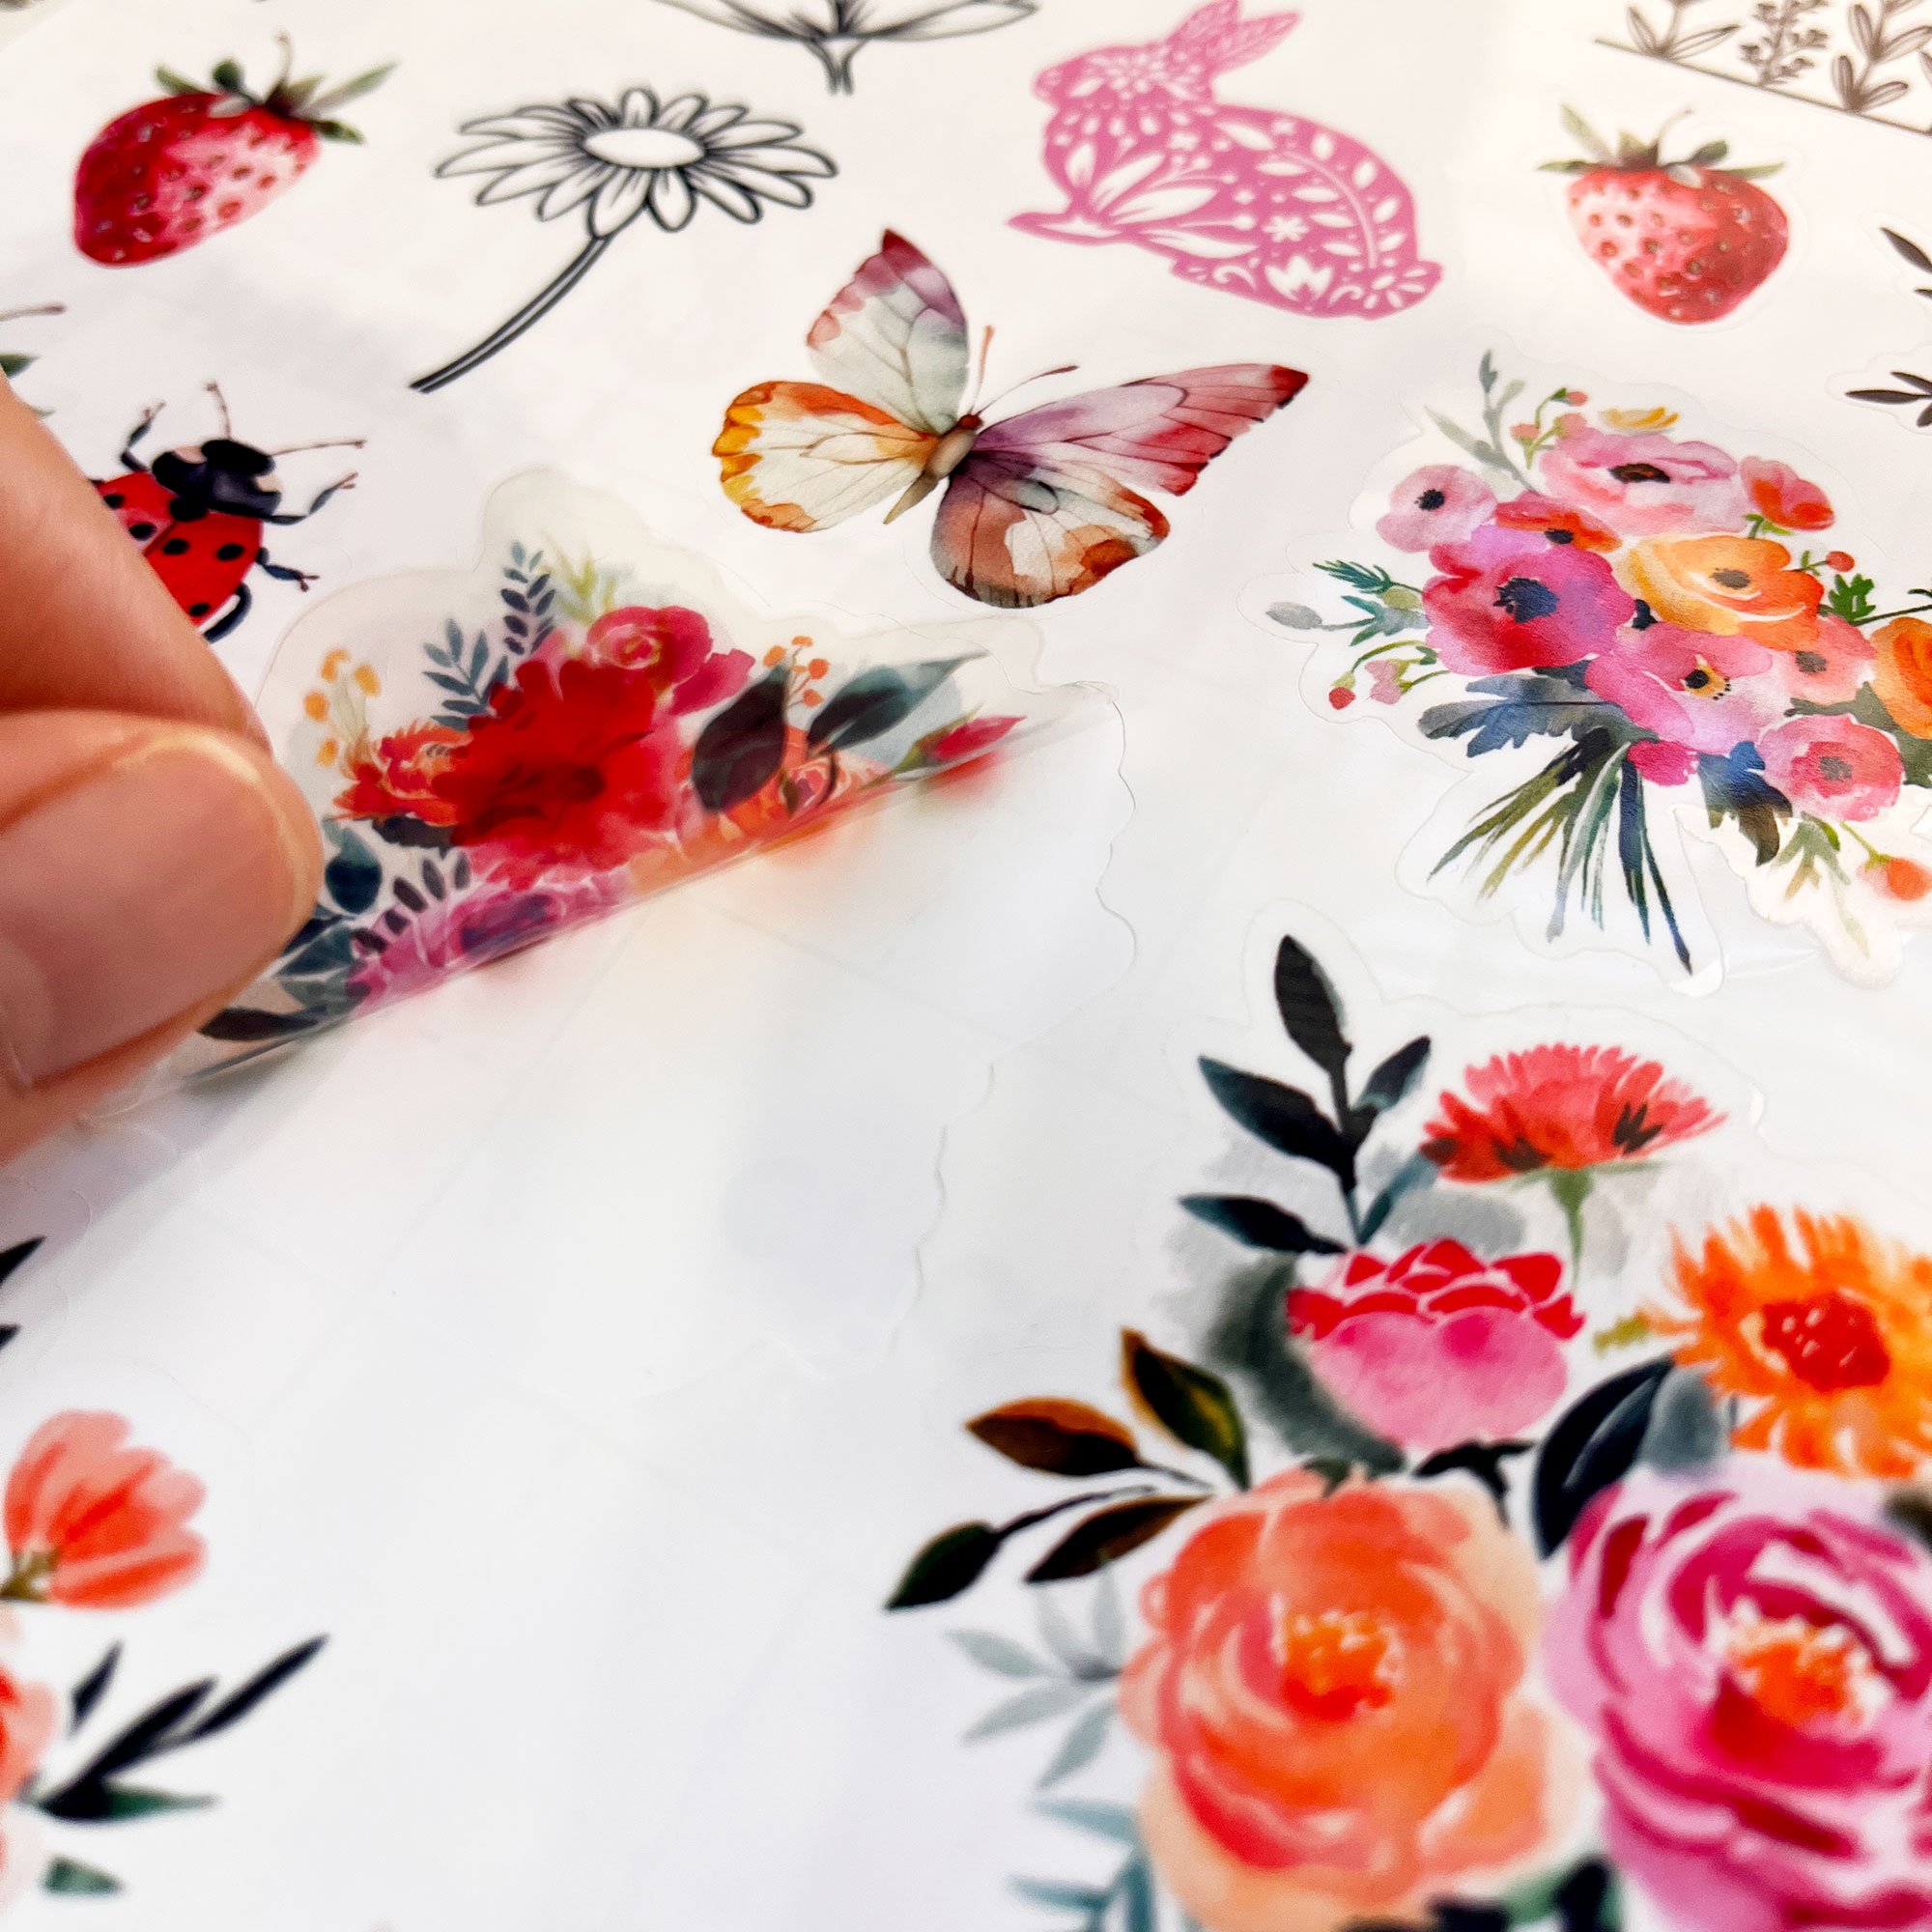 njs-240404-project-floral-stickers-main-web.jpg